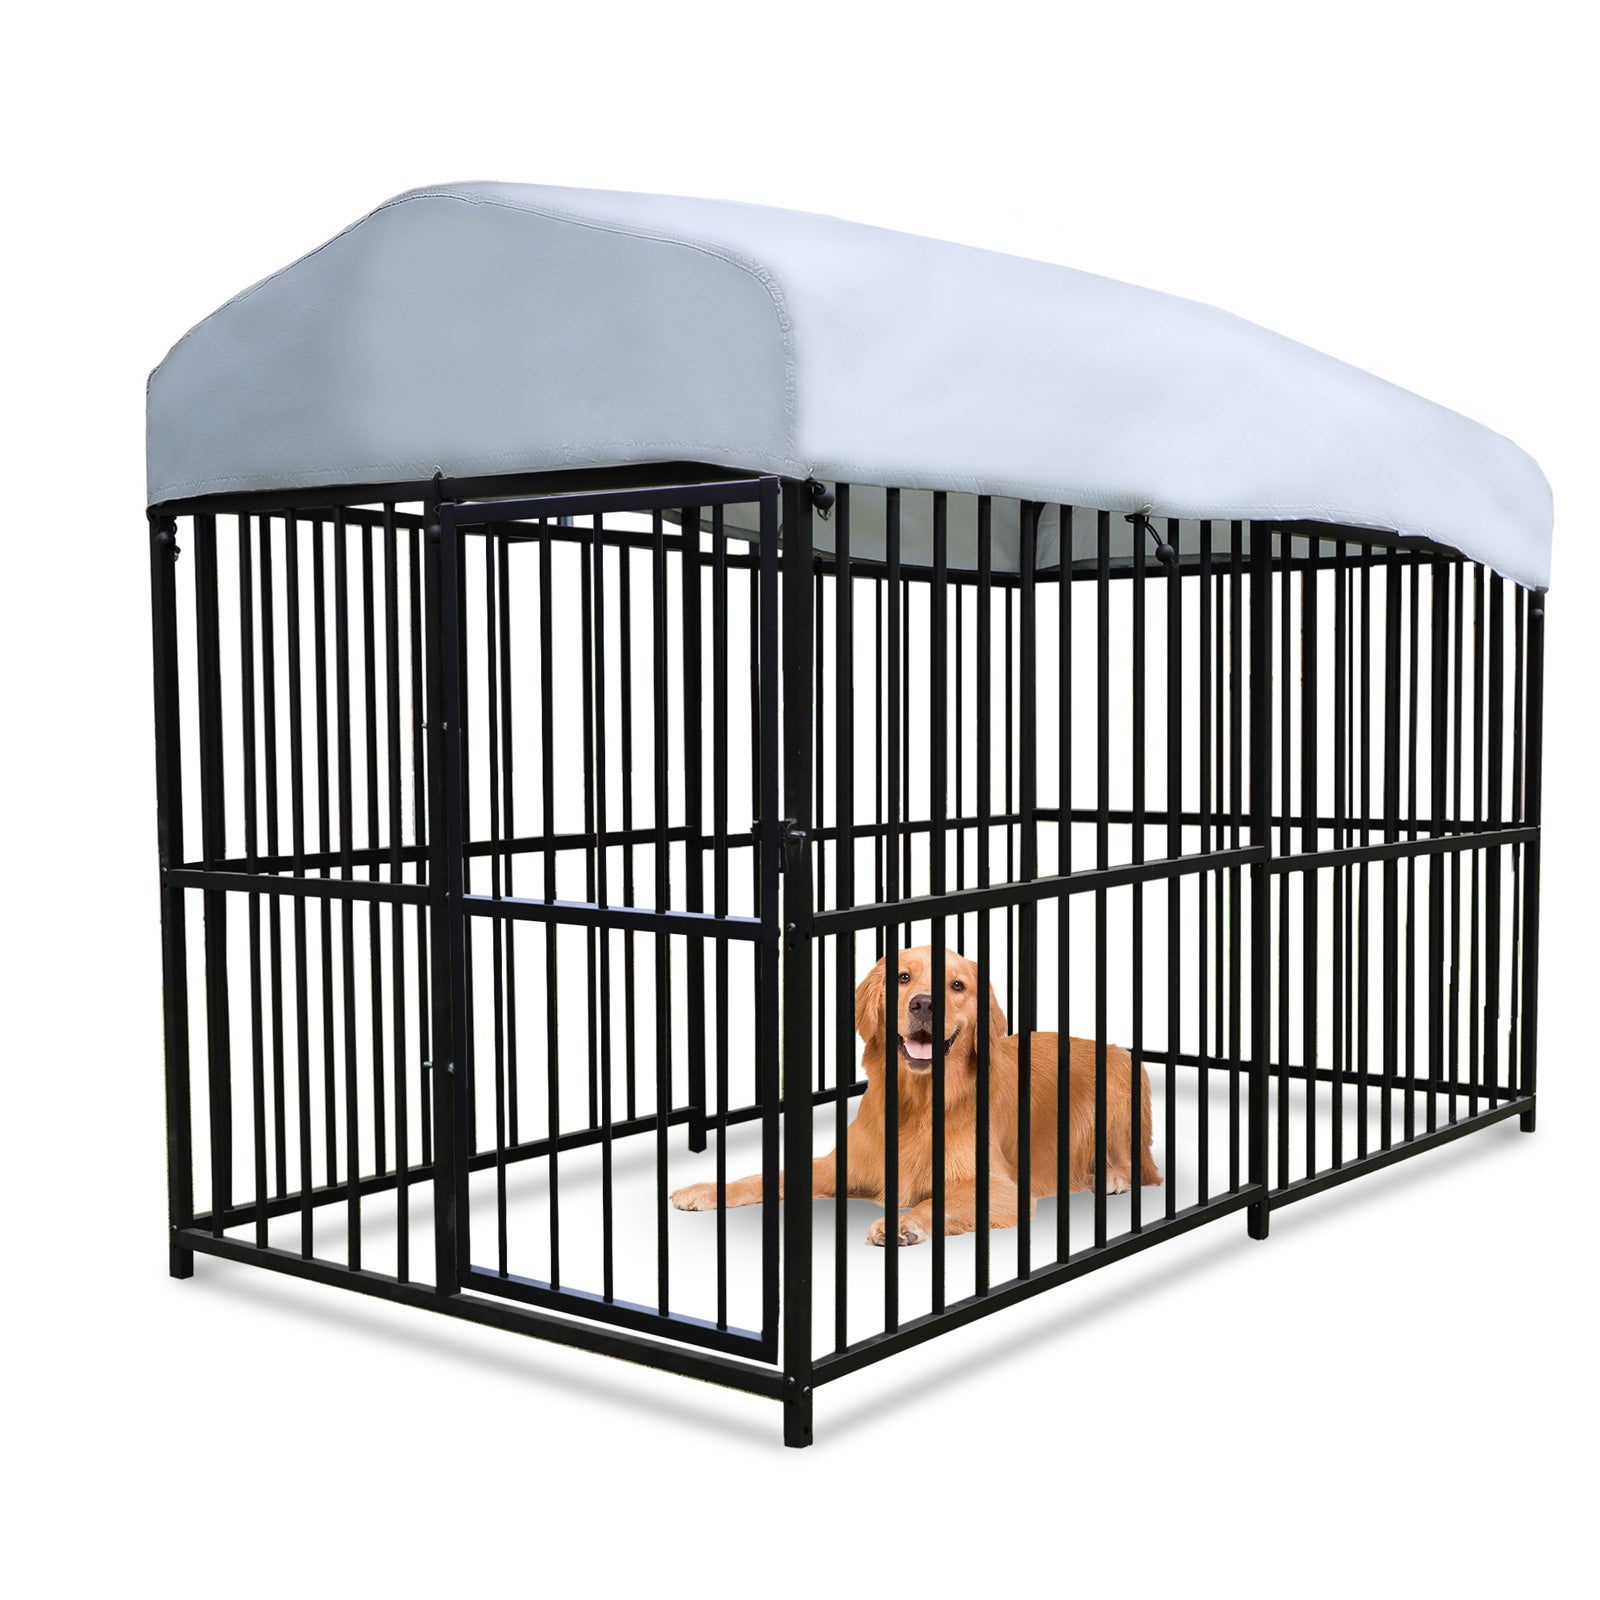 7.8'x4'x5' Large Dog Outdoor Kennel Pet Playpen with Waterproof Cover and Secure Lock, Black